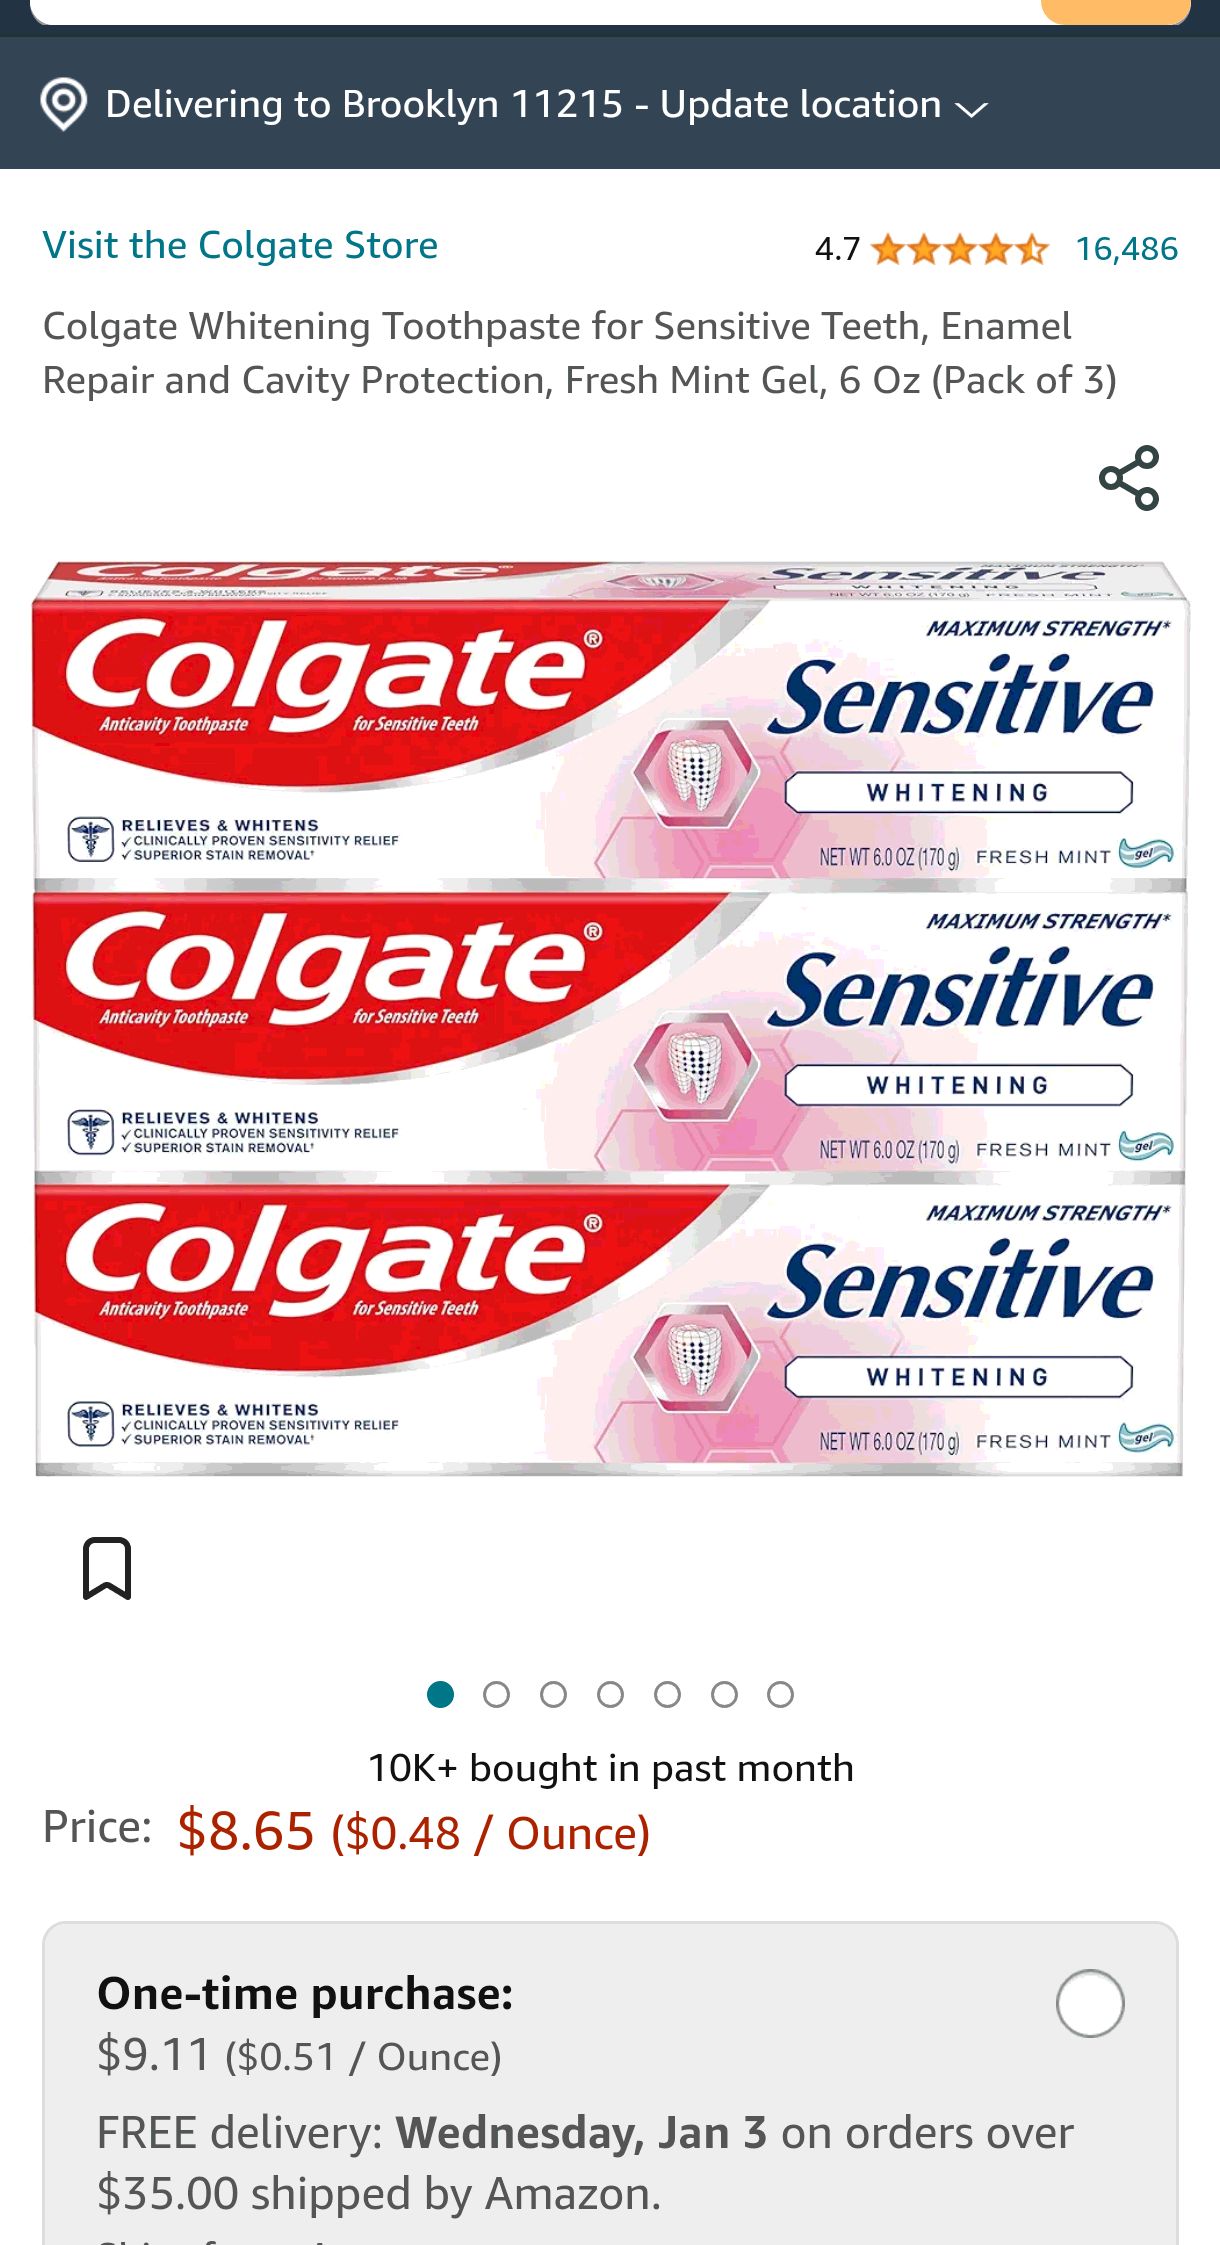 Amazon.com : Colgate Whitening Toothpaste for Sensitive Teeth, Enamel Repair and Cavity Protection, Fresh Mint Gel, 6 Oz (Pack of 3) : Health & Household